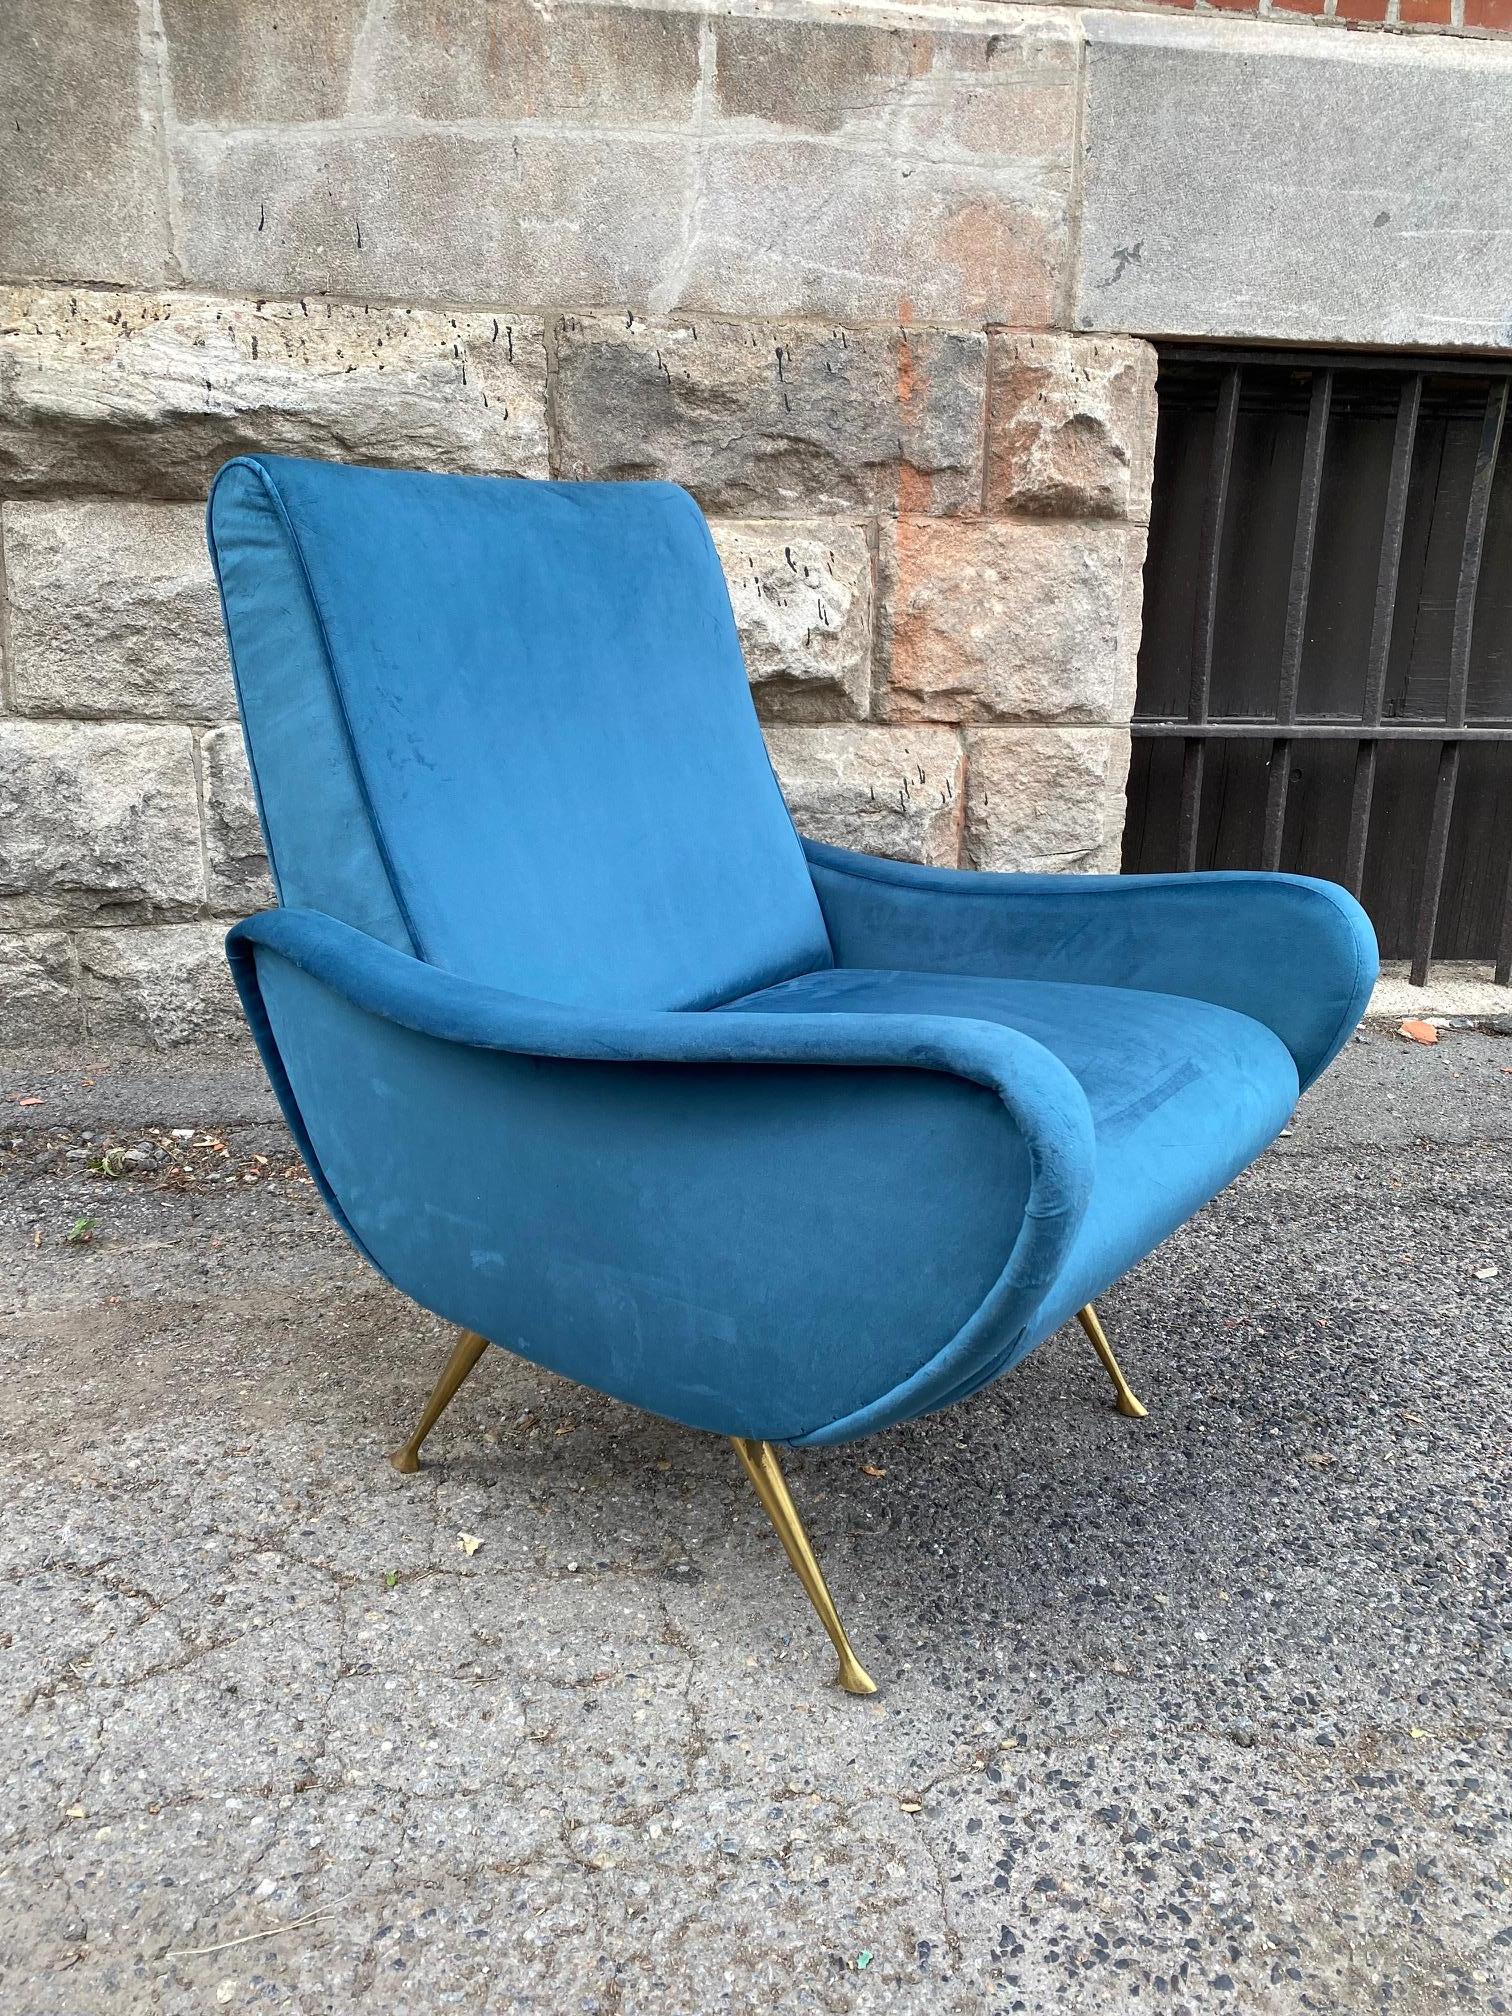 Soft blue velvet lady chair in the style of Marco Zanuso for Artflex.
The chair was awarded the Gold Medal at the IX Milan Triennale, in 1951.